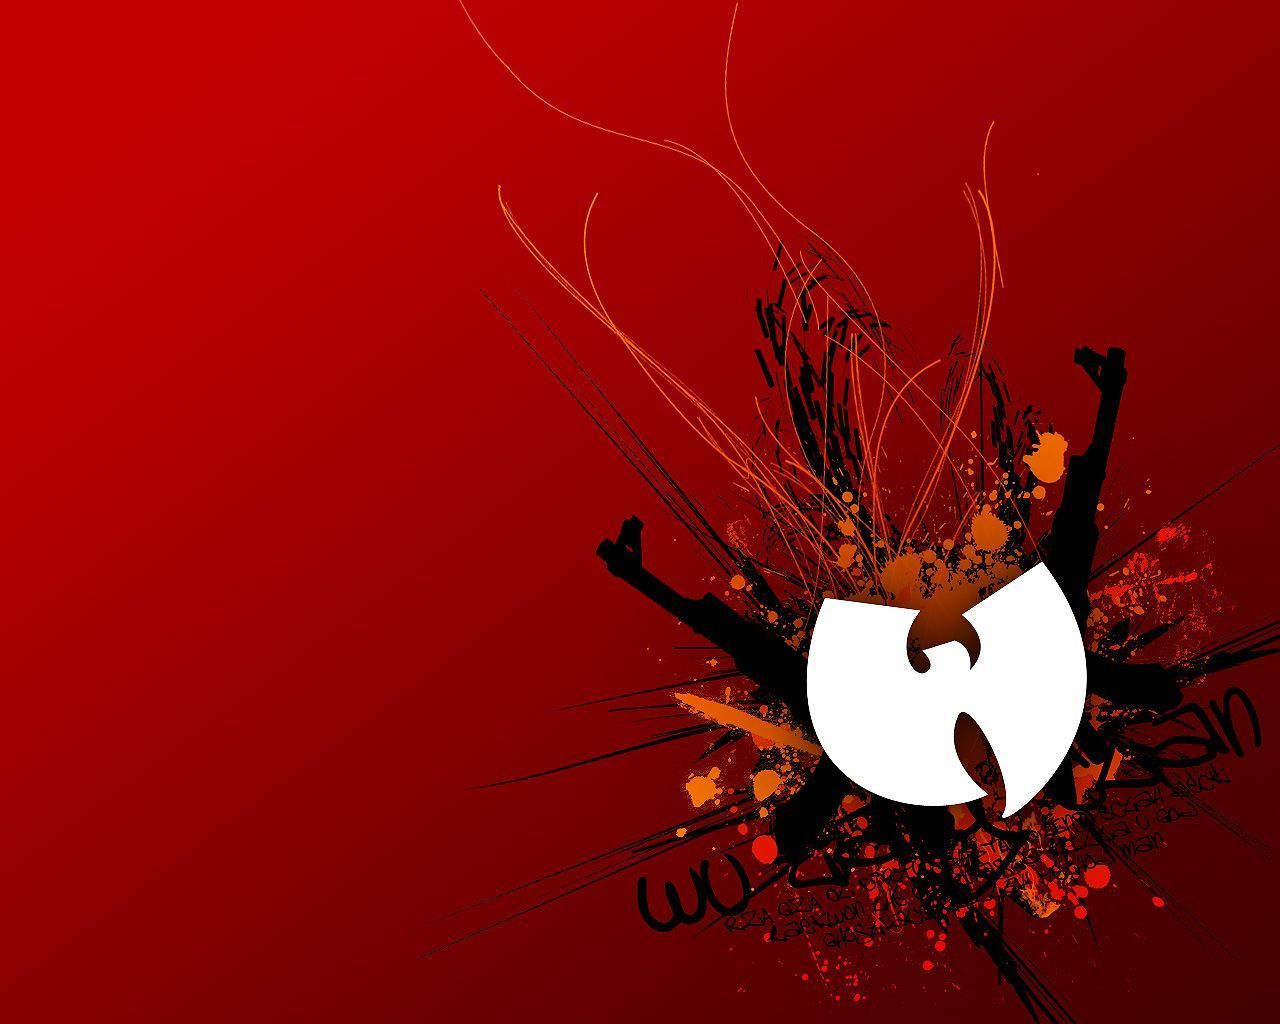 wu-tang clan wallpaper by onemicGfx on DeviantArt